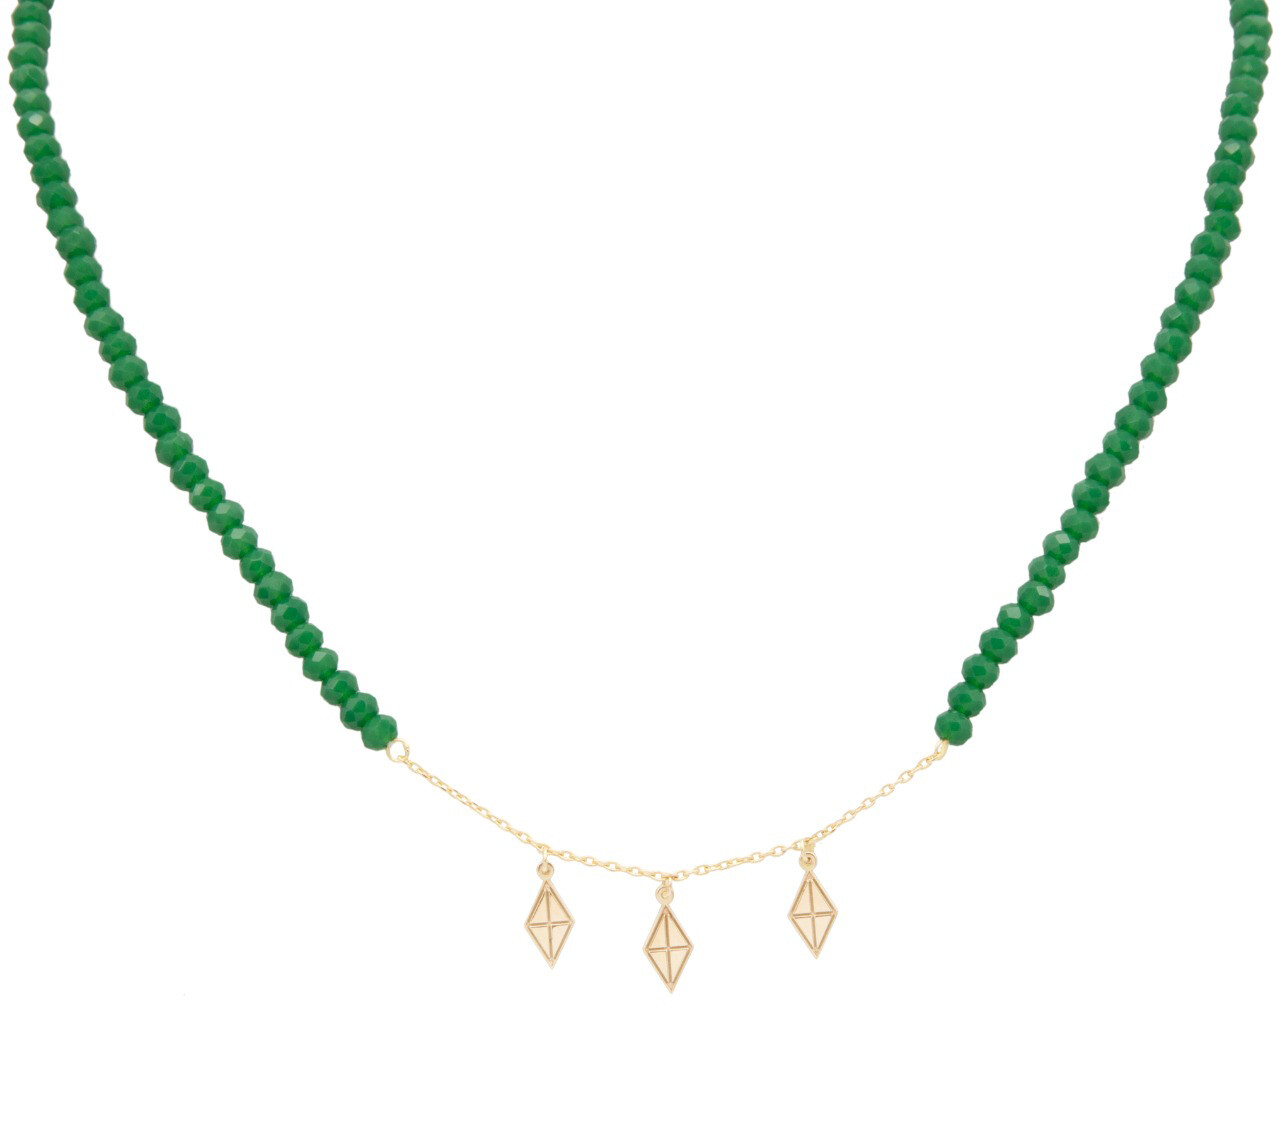 Eternal Gold Necklace with Colored Beads